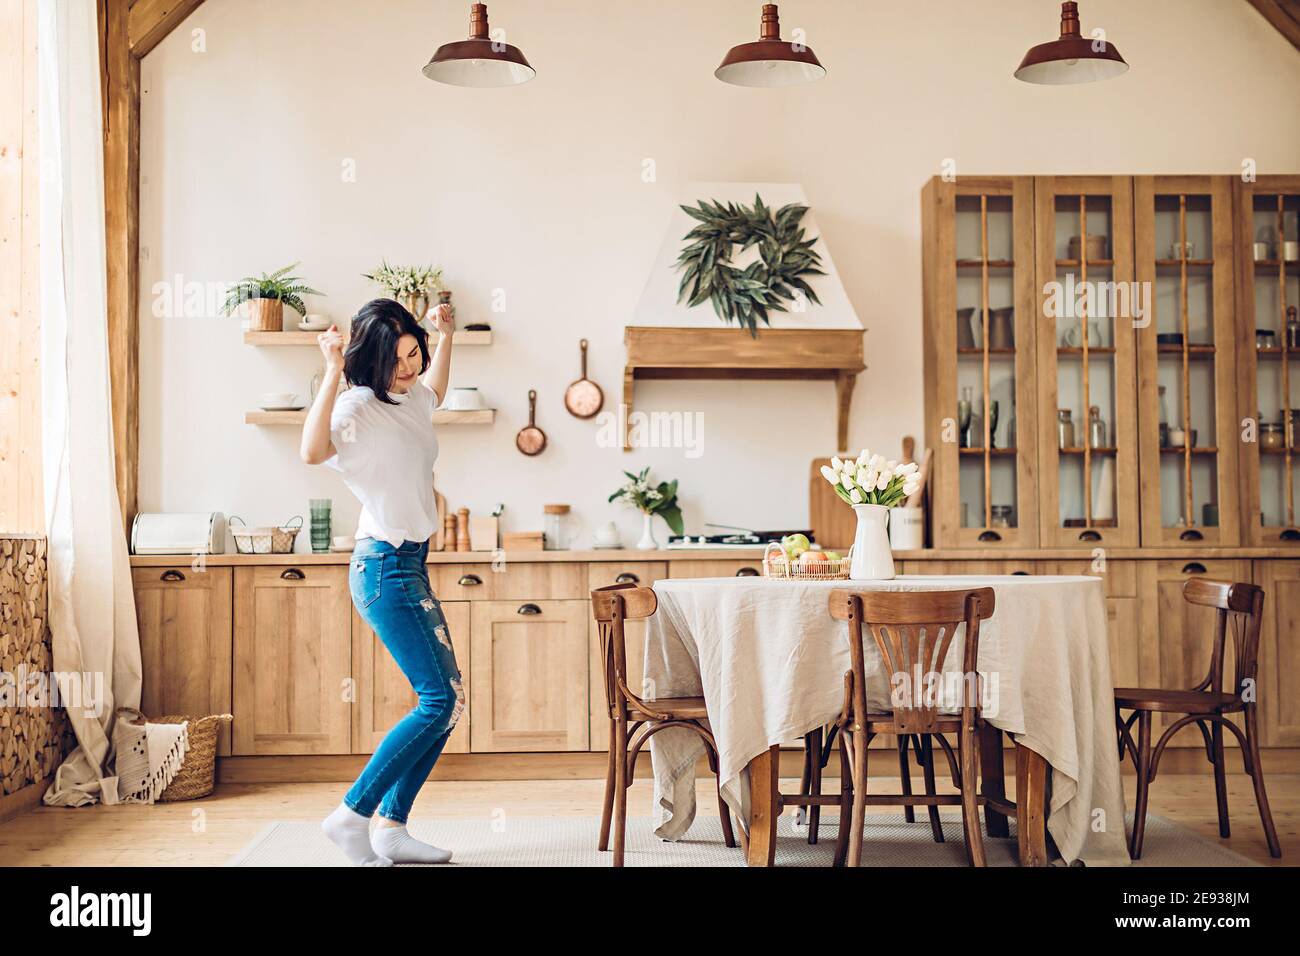 A young girl performs a joyful victory dance in the middle of the kitchen at home Stock Photo